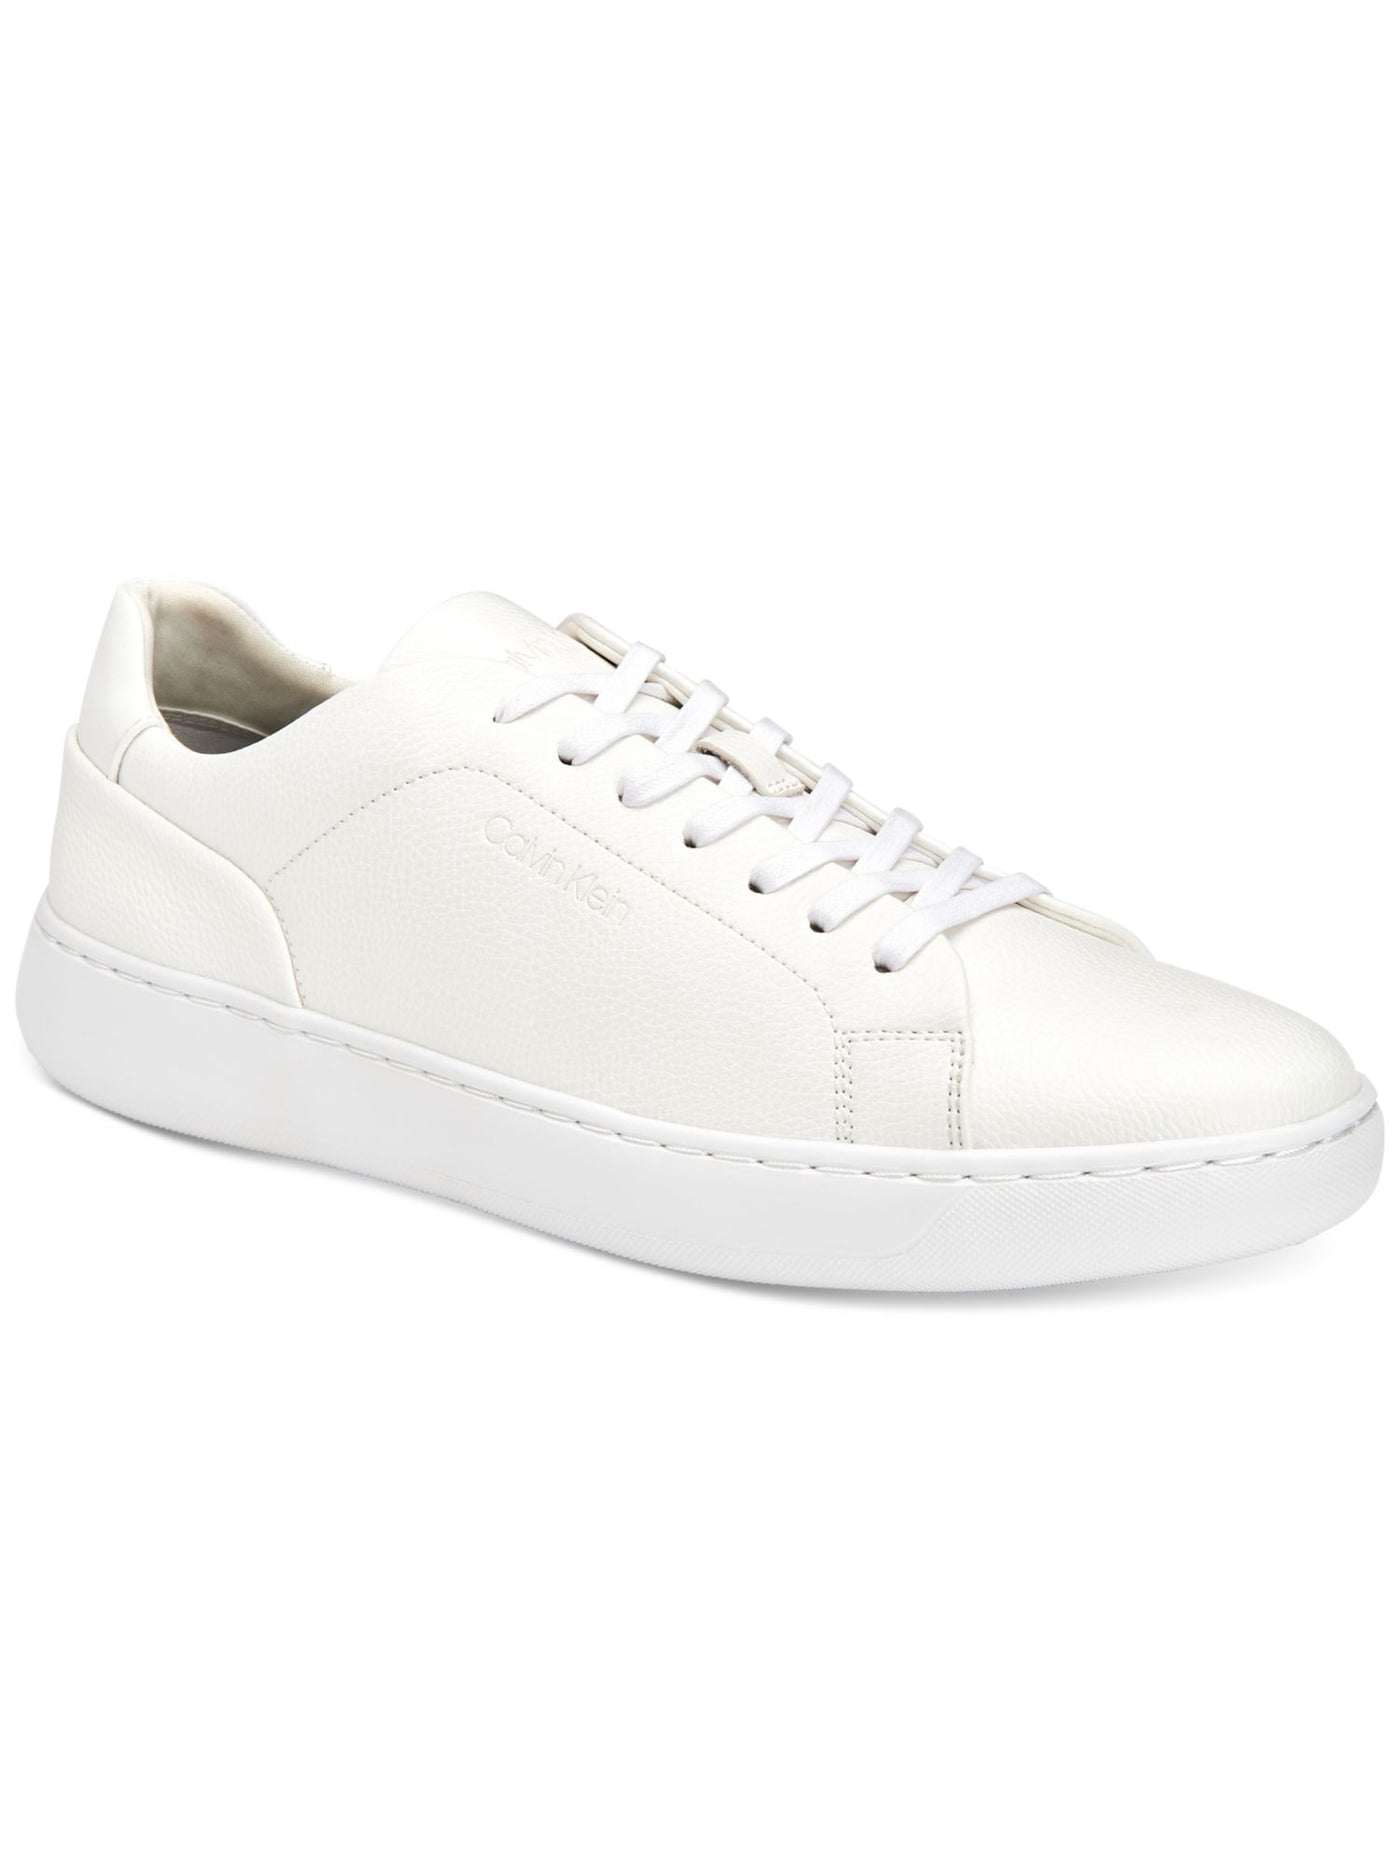 CALVIN KLEIN Mens White Padded Removable Insole Falconi Round Toe Platform Lace-Up Sneakers Shoes 11.5 M